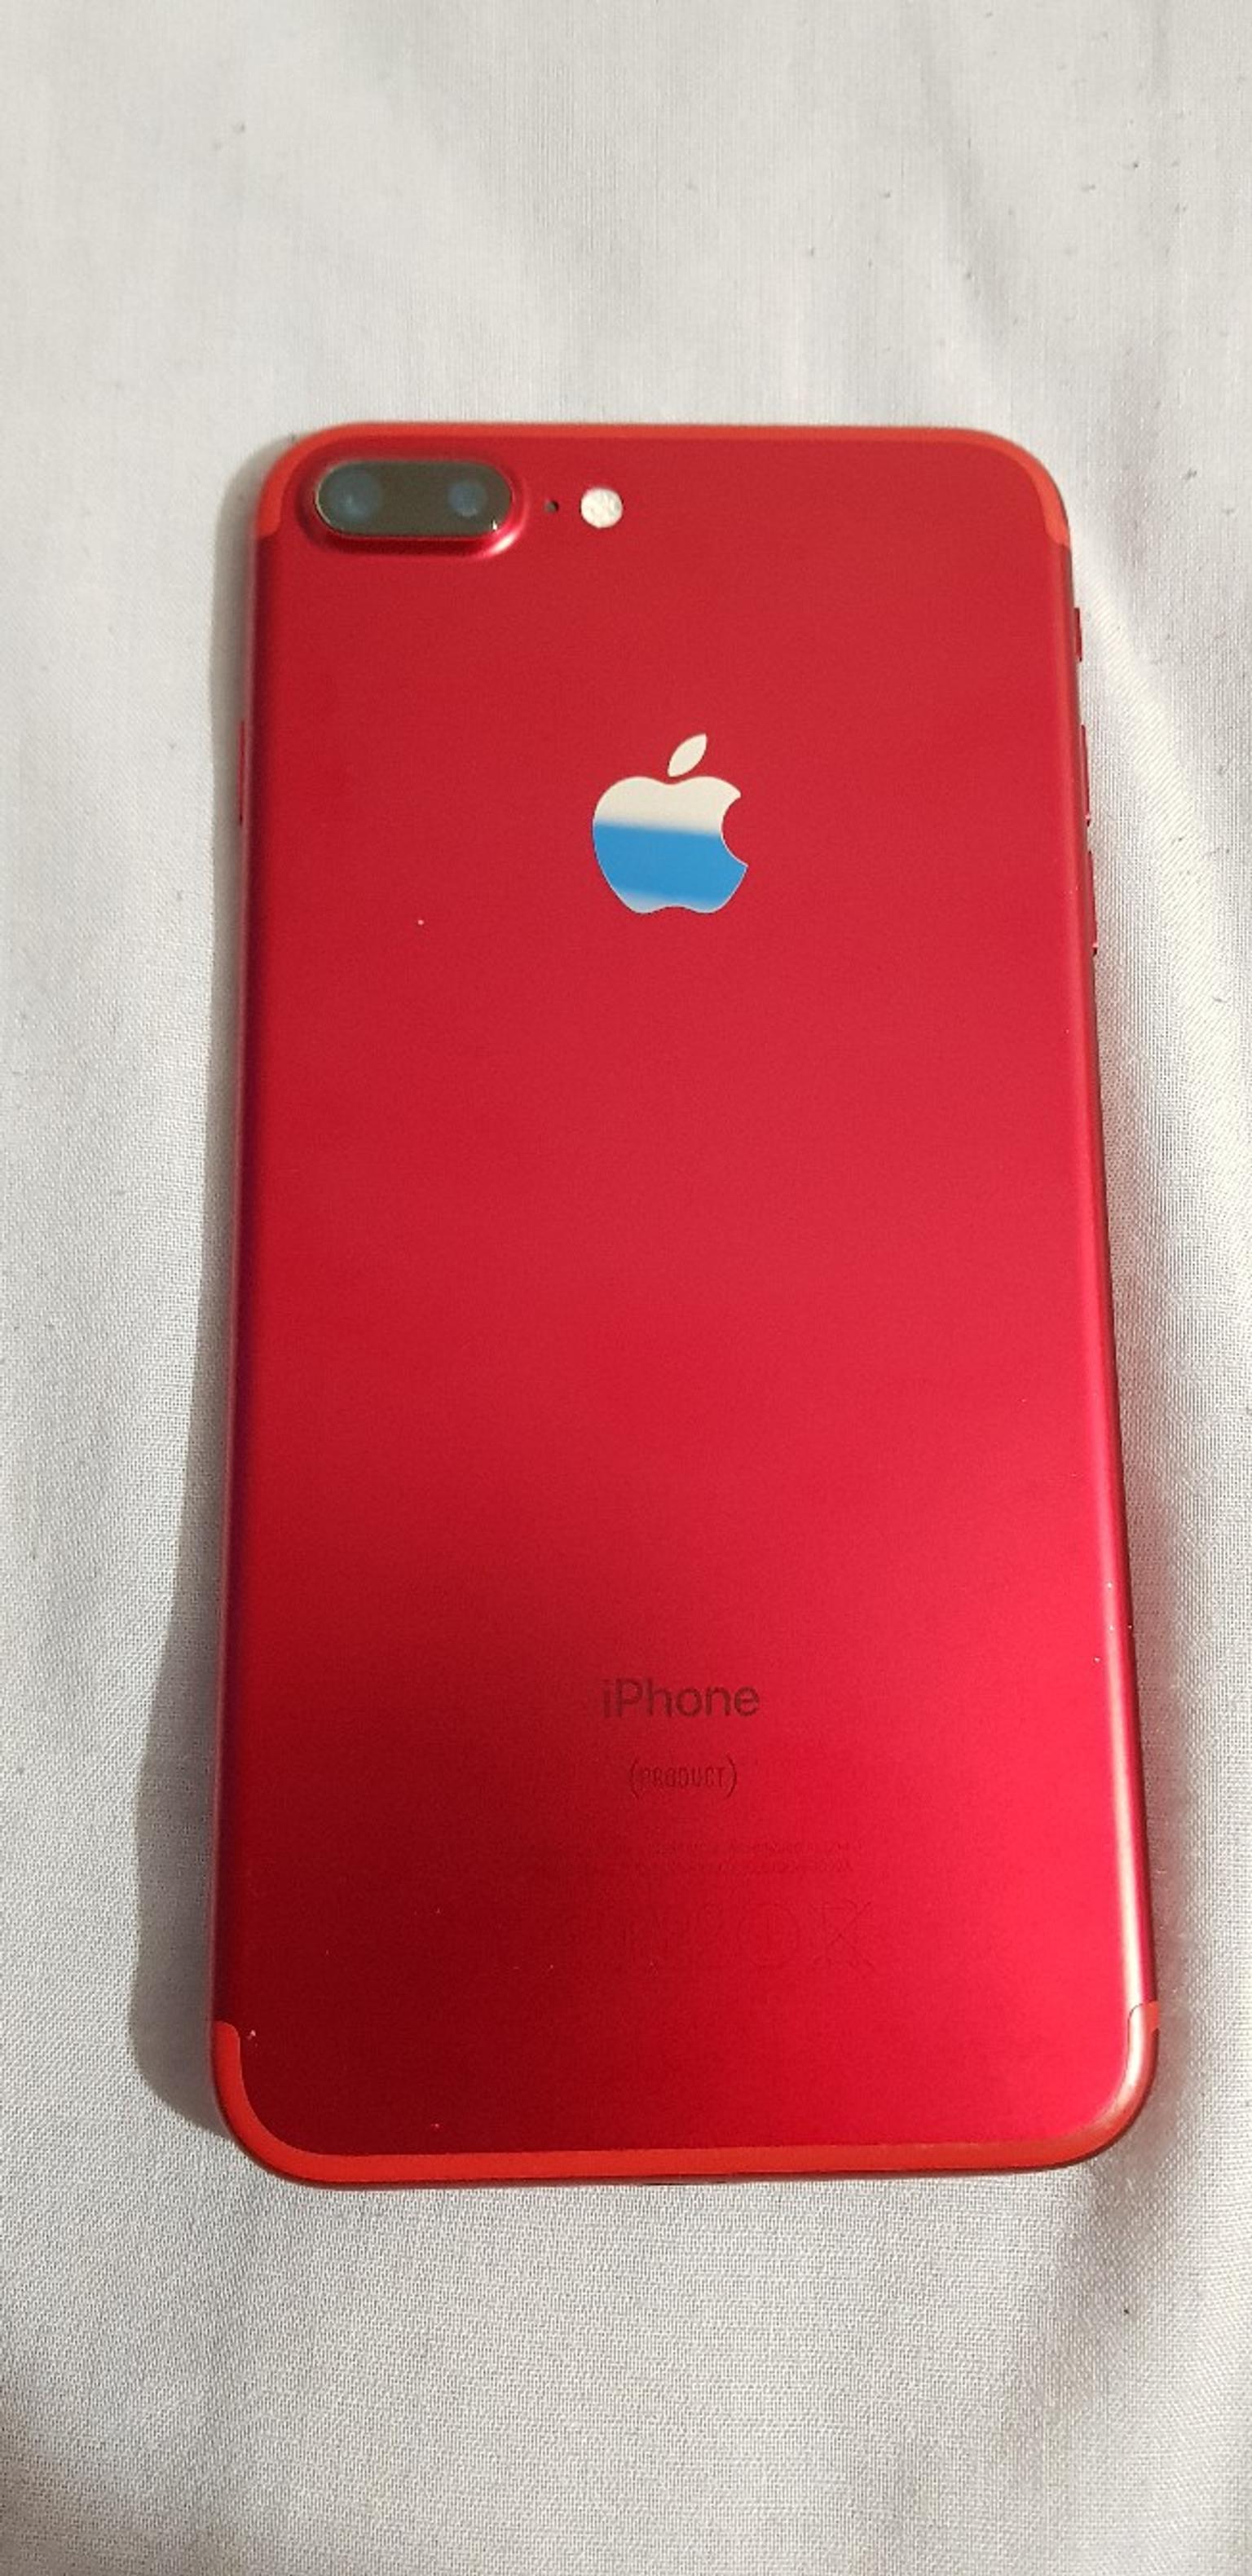 Iphone 7 Plus 128gb Red In B69 Sandwell For 300 00 For Sale Shpock